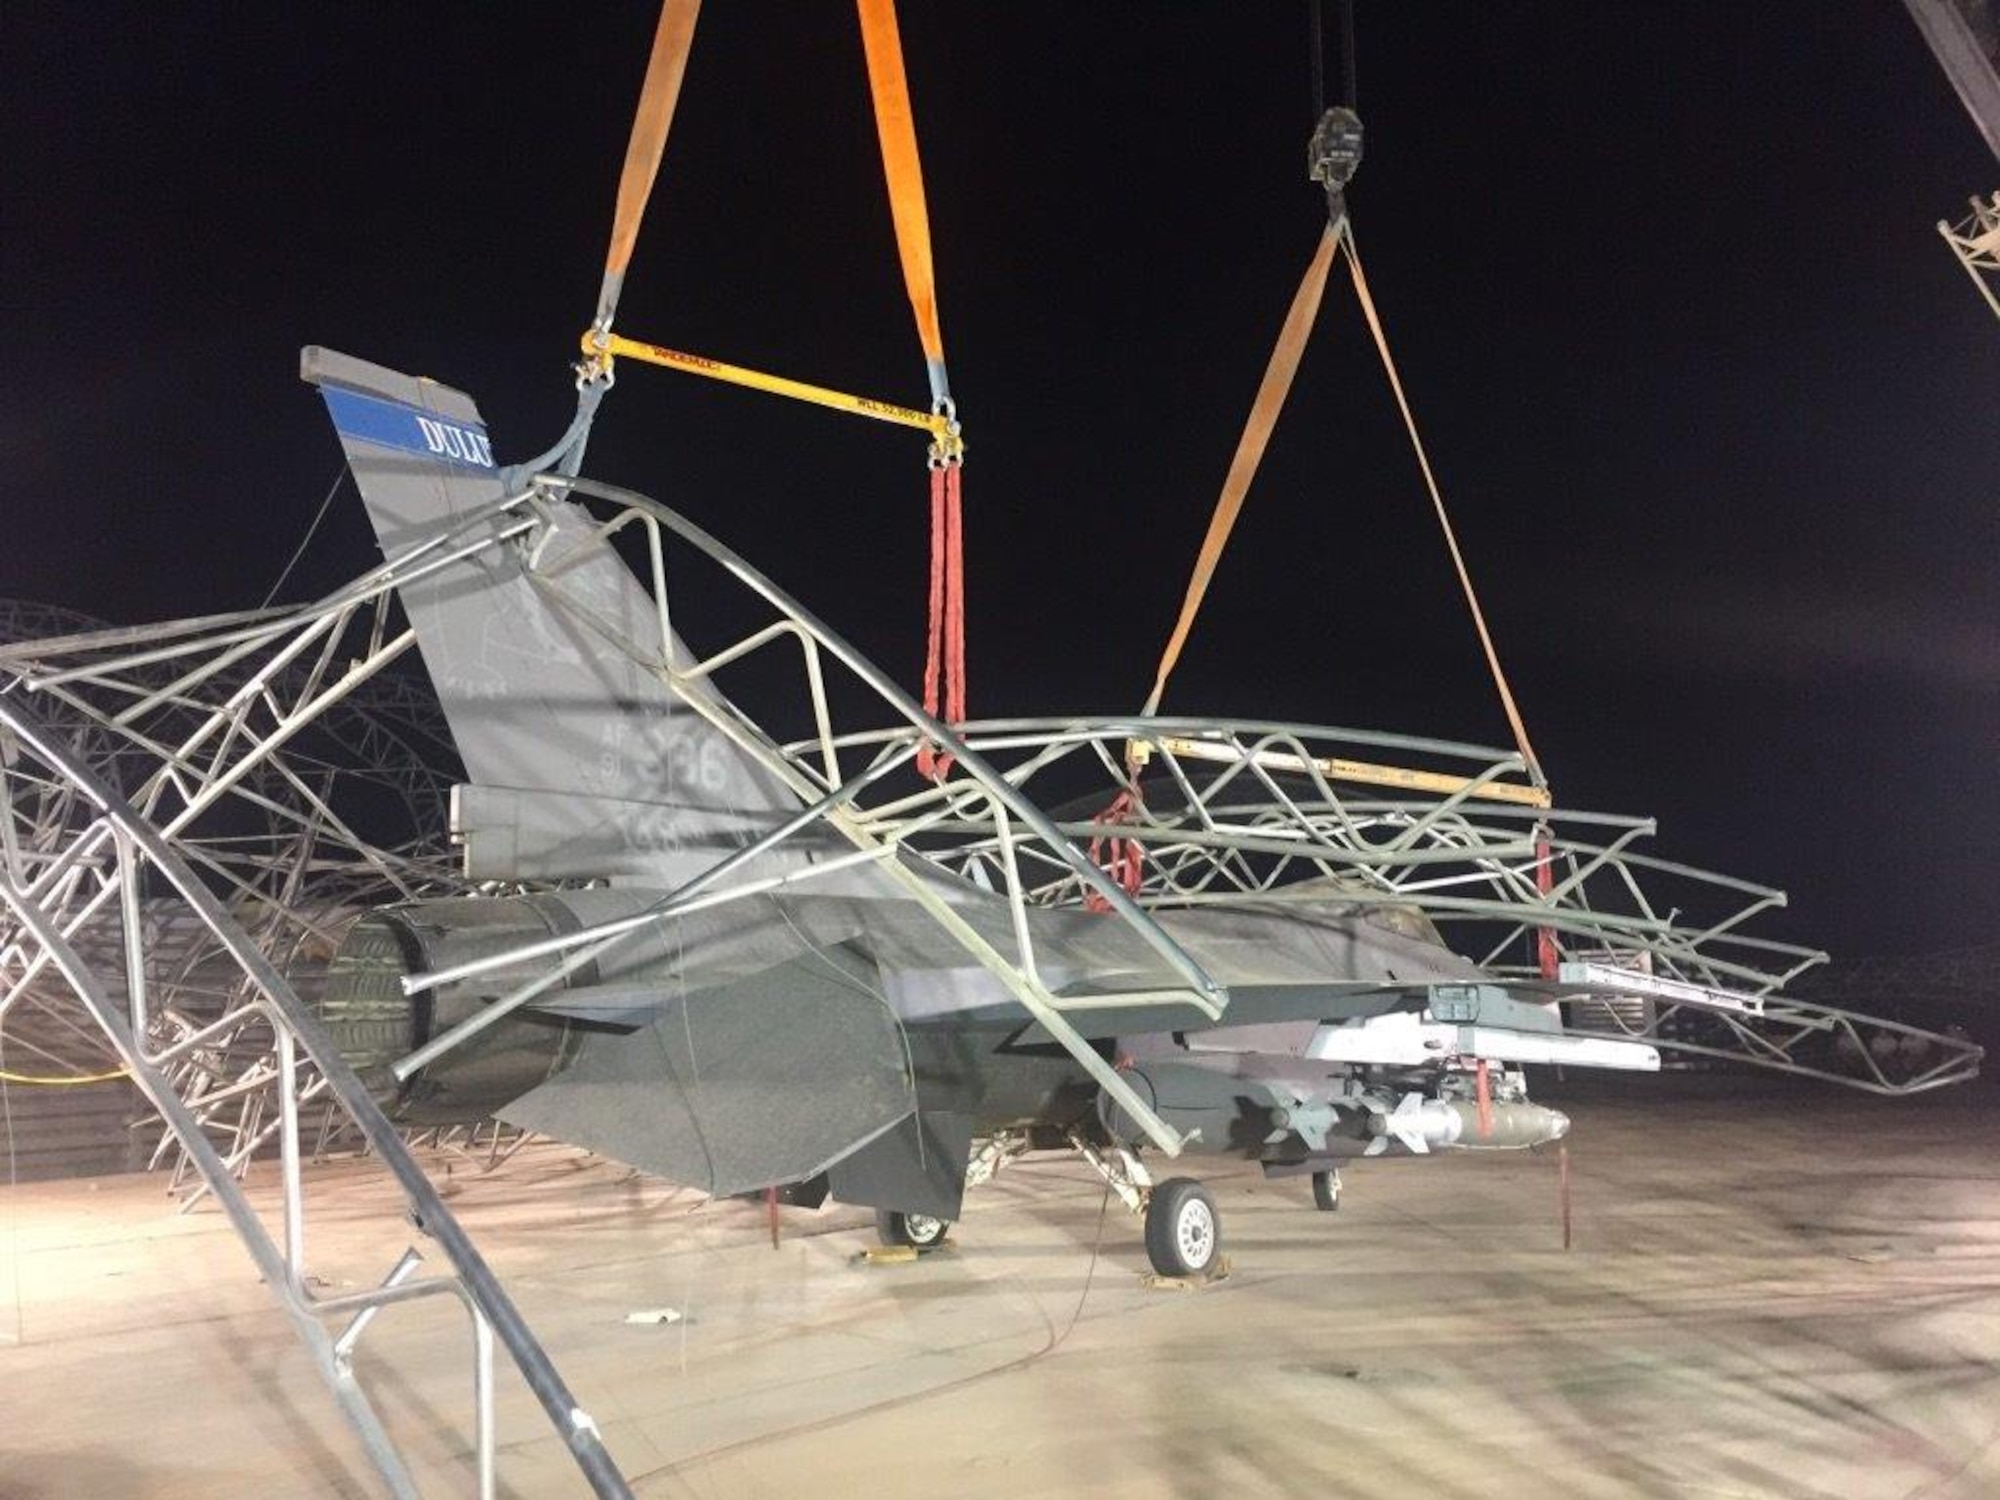 Civil Engineers and aircraft maintenance personnel untangle and remove sunshades after they collapsed on F-16 Fighting Falcons during a storm that caused 91-mile per hour winds at the 407th Air Expeditionary Group in 2018.